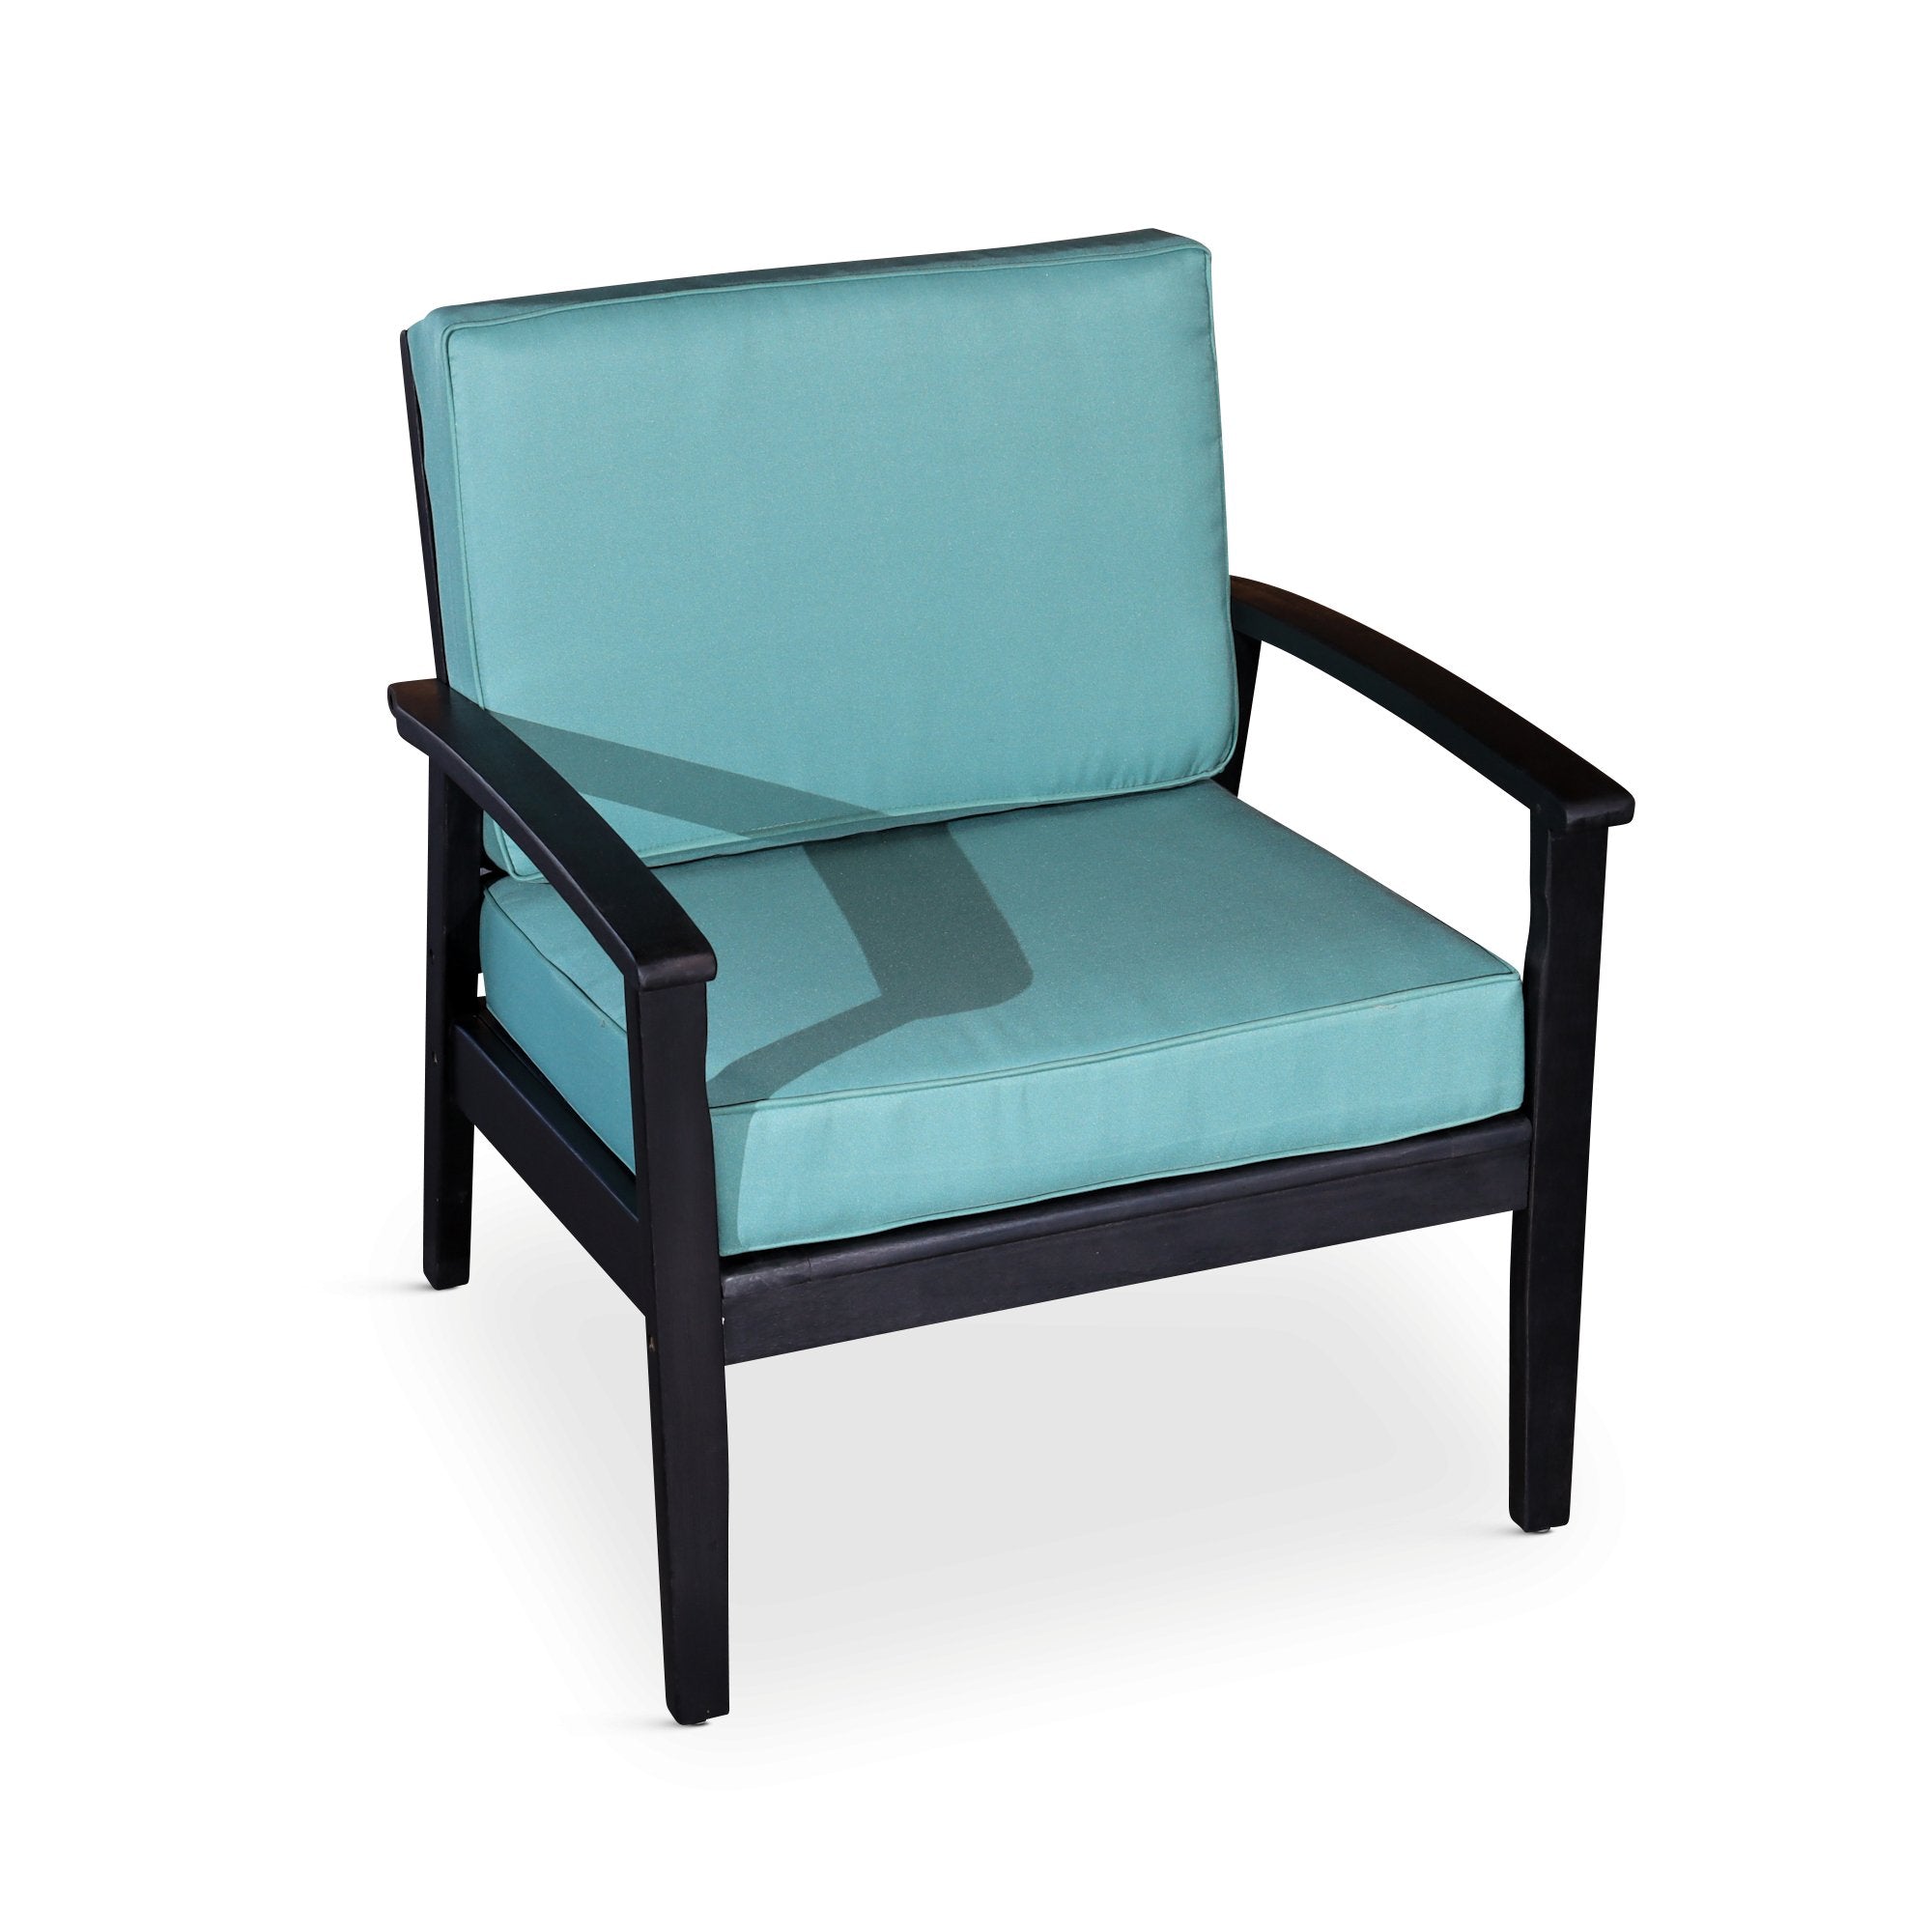 Deep Seat Outdoor Chair, Espresso Finish, Sage Cushion - Tuesday Morning-Chairs & Seating